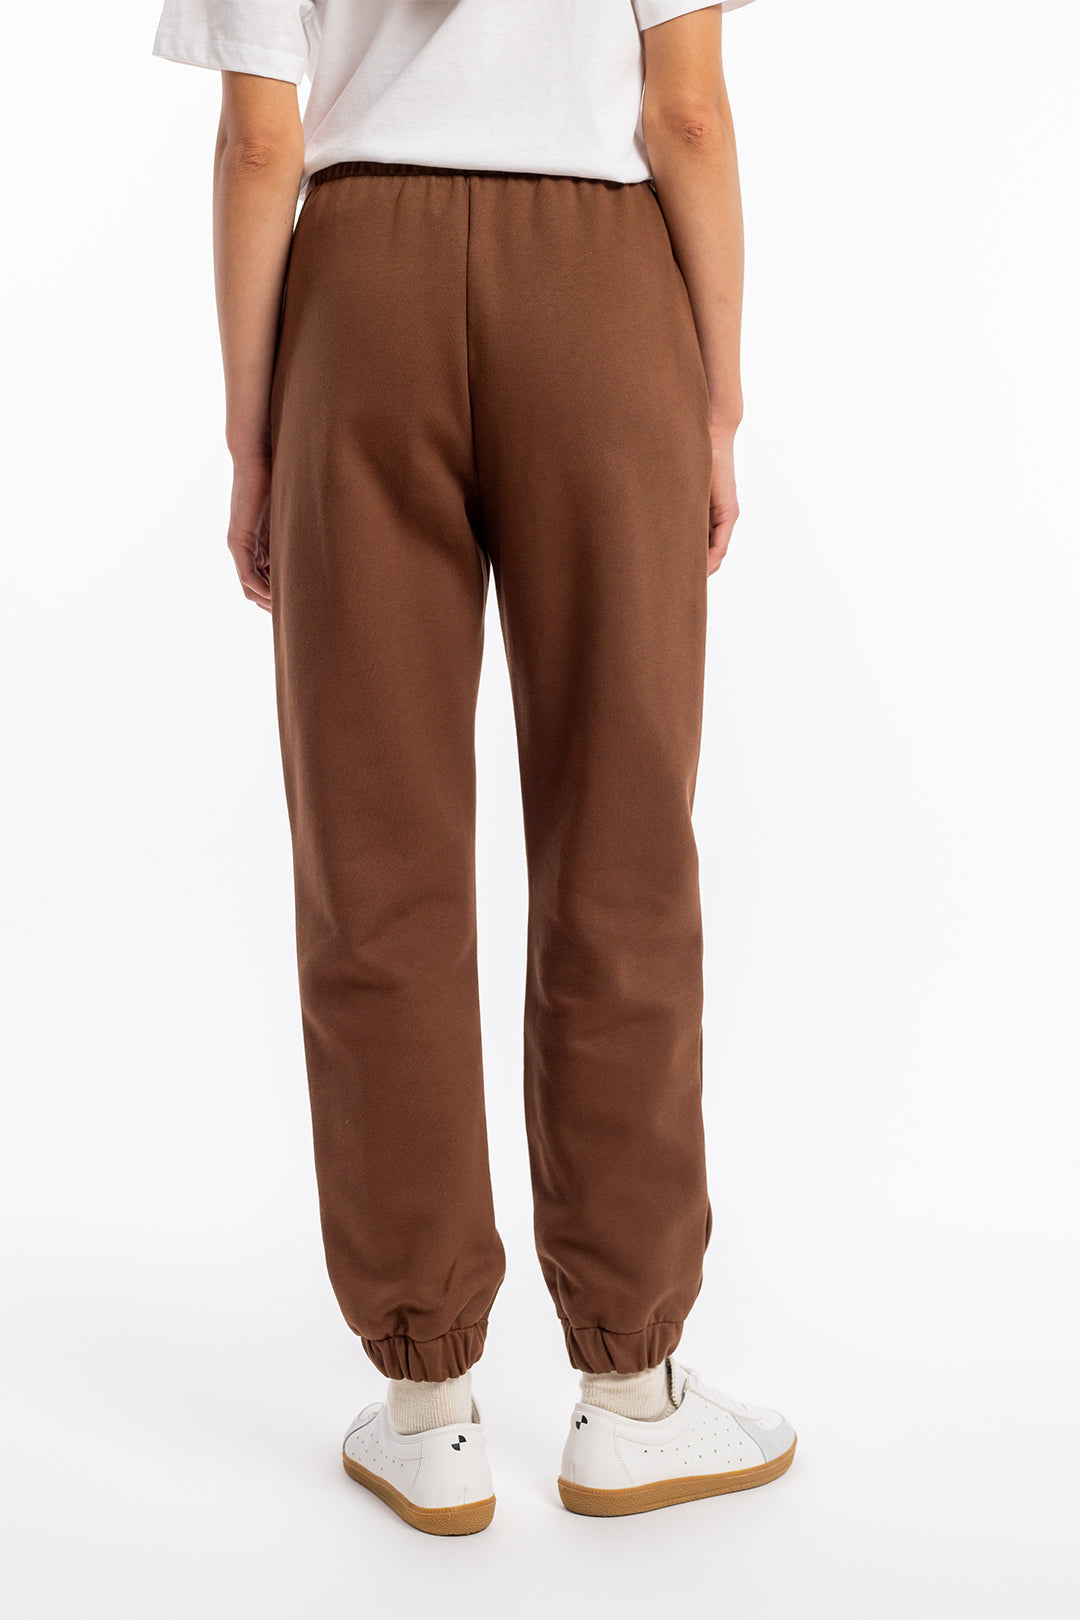 Dark brown jogging pants Logo made from organic cotton by Rotholz